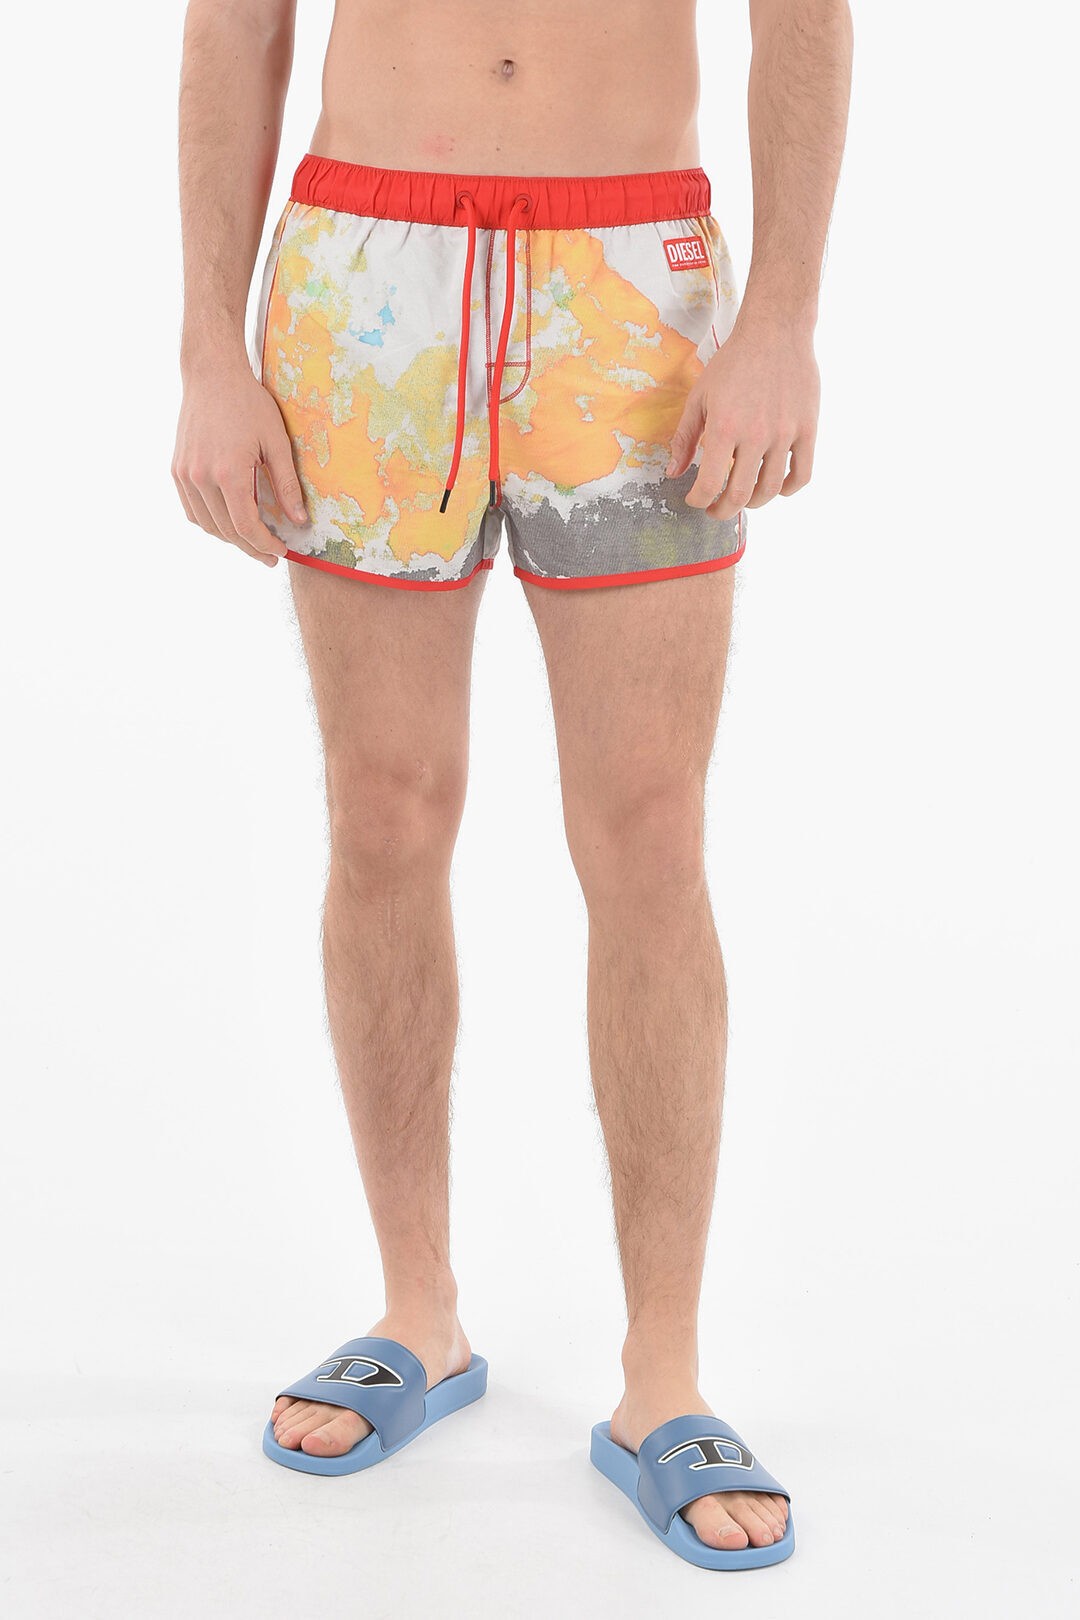 DIESEL ディーゼル Multicolor スイムウェア 00S0L6 0IFAI 8HJ メンズ RED TAG PATTERNED BMBX-REEF-30 SWIM SHORTS WITH DRAWSTRING W  dk